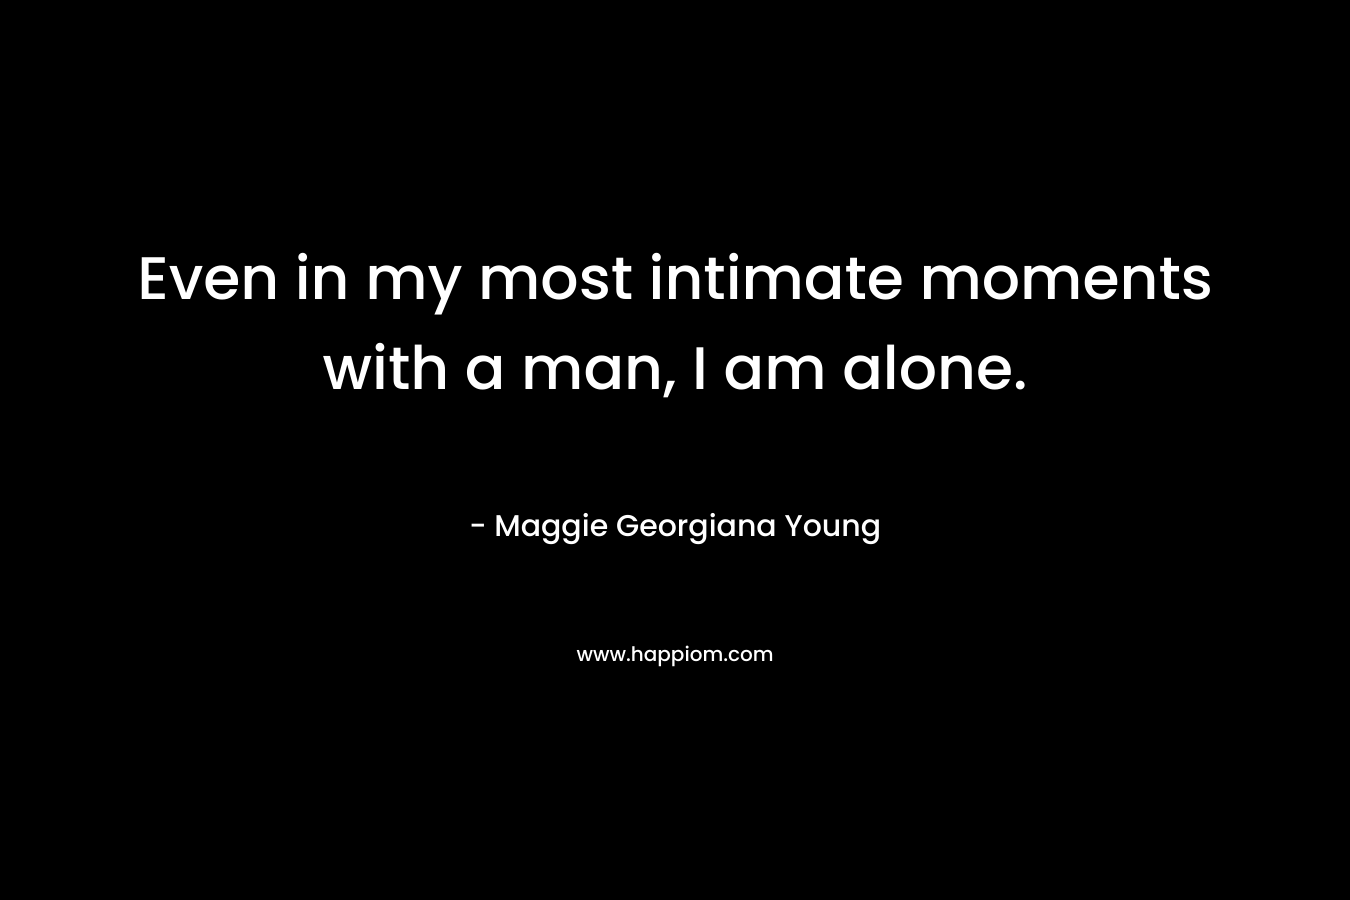 Even in my most intimate moments with a man, I am alone. – Maggie Georgiana Young